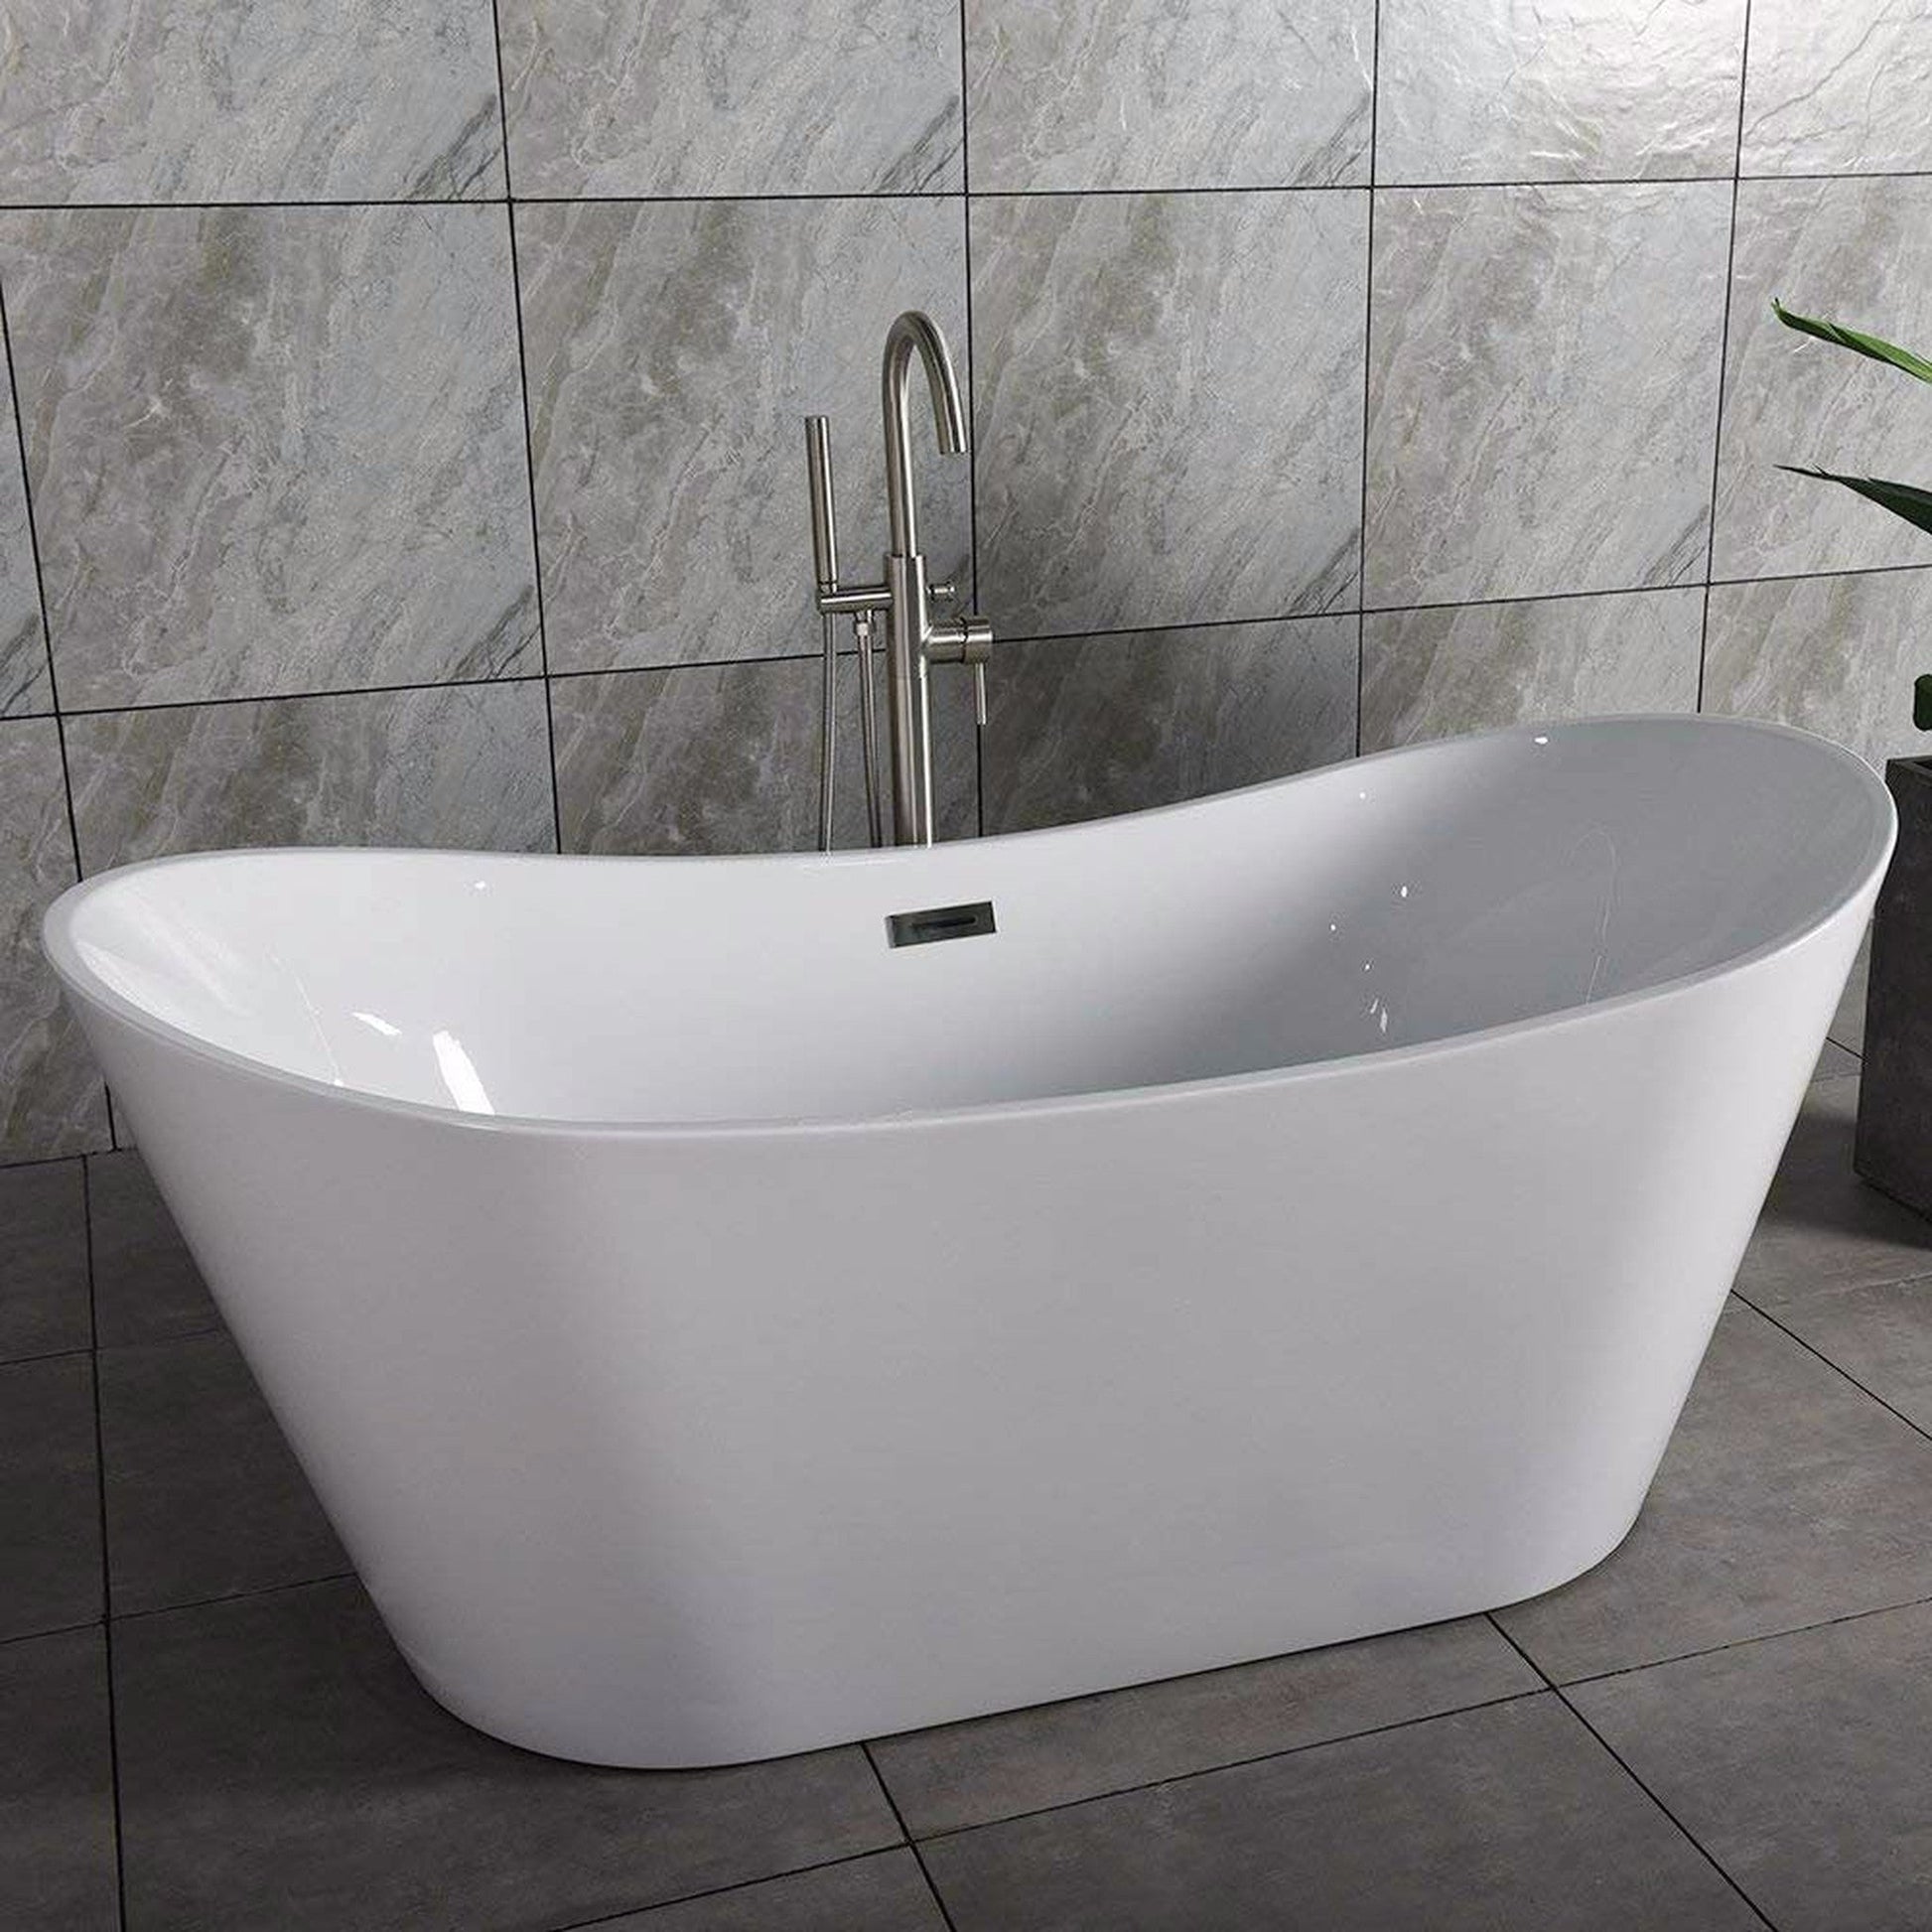 WoodBridge B0010 67" White Acrylic Freestanding Contemporary Soaking Bathtub With Brushed Nickel Drain, Overflow, F0070BNDR Tub Filler and Caddy Tray